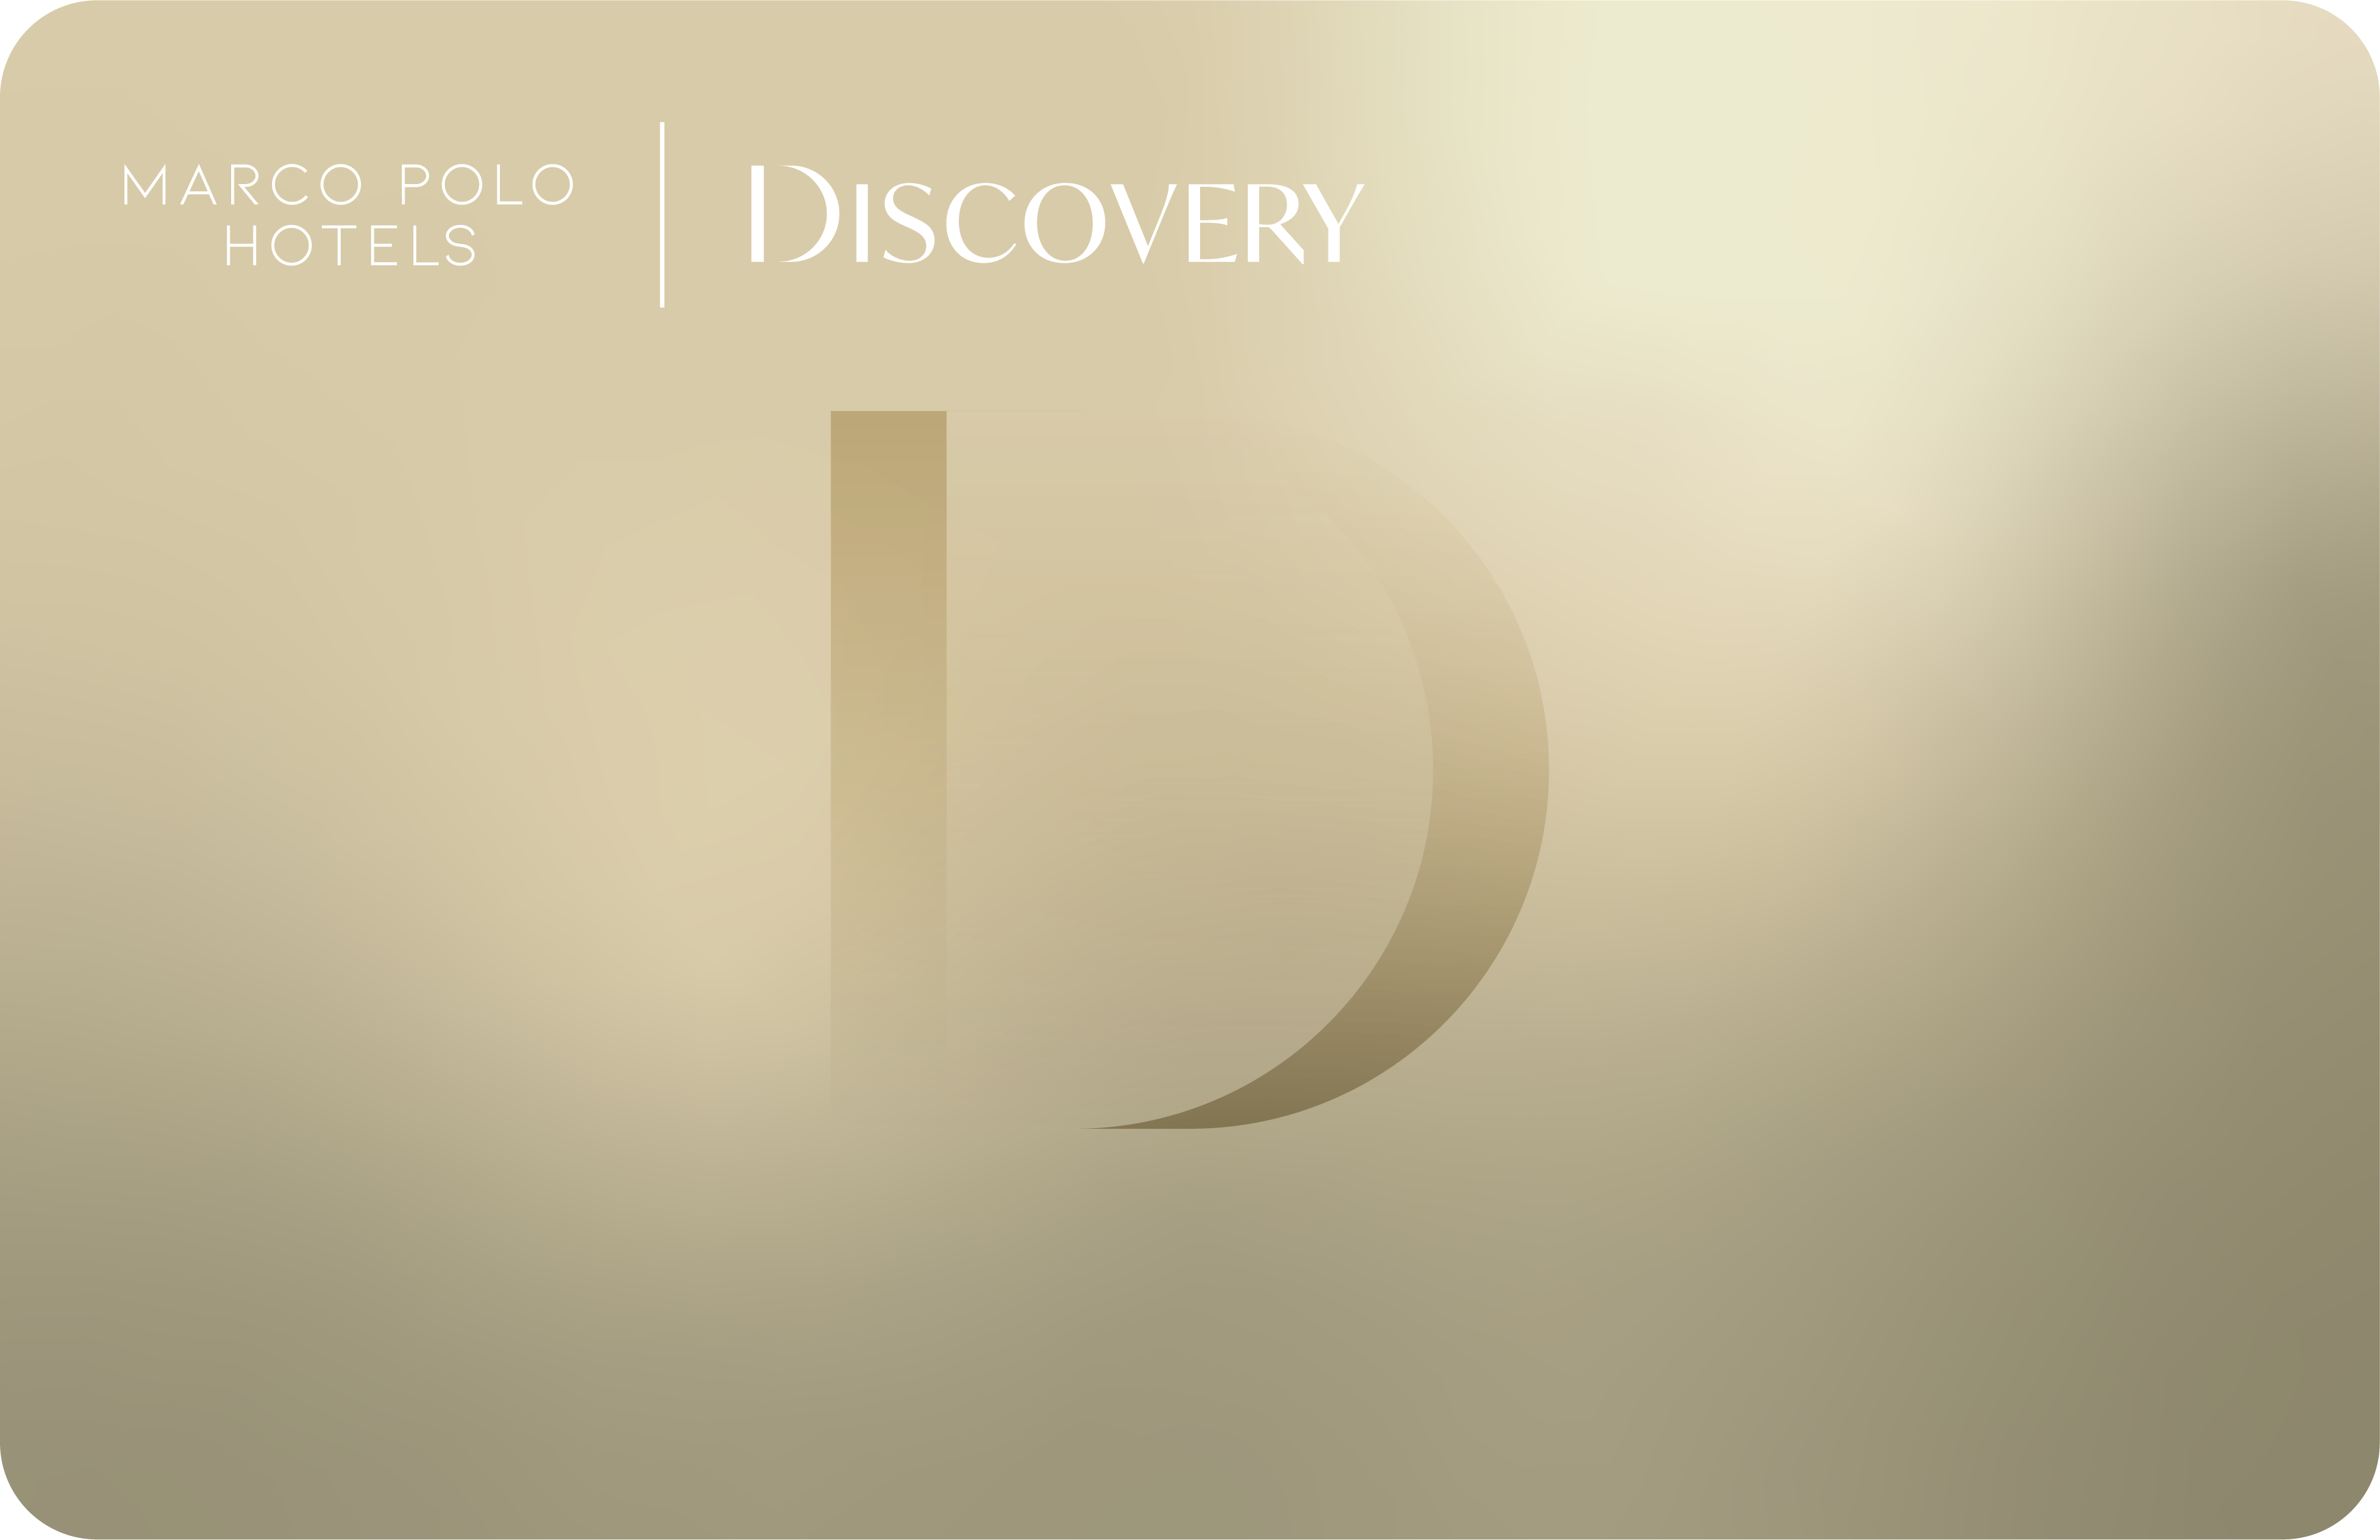 Gold_Marco Polo DISCOVERY 